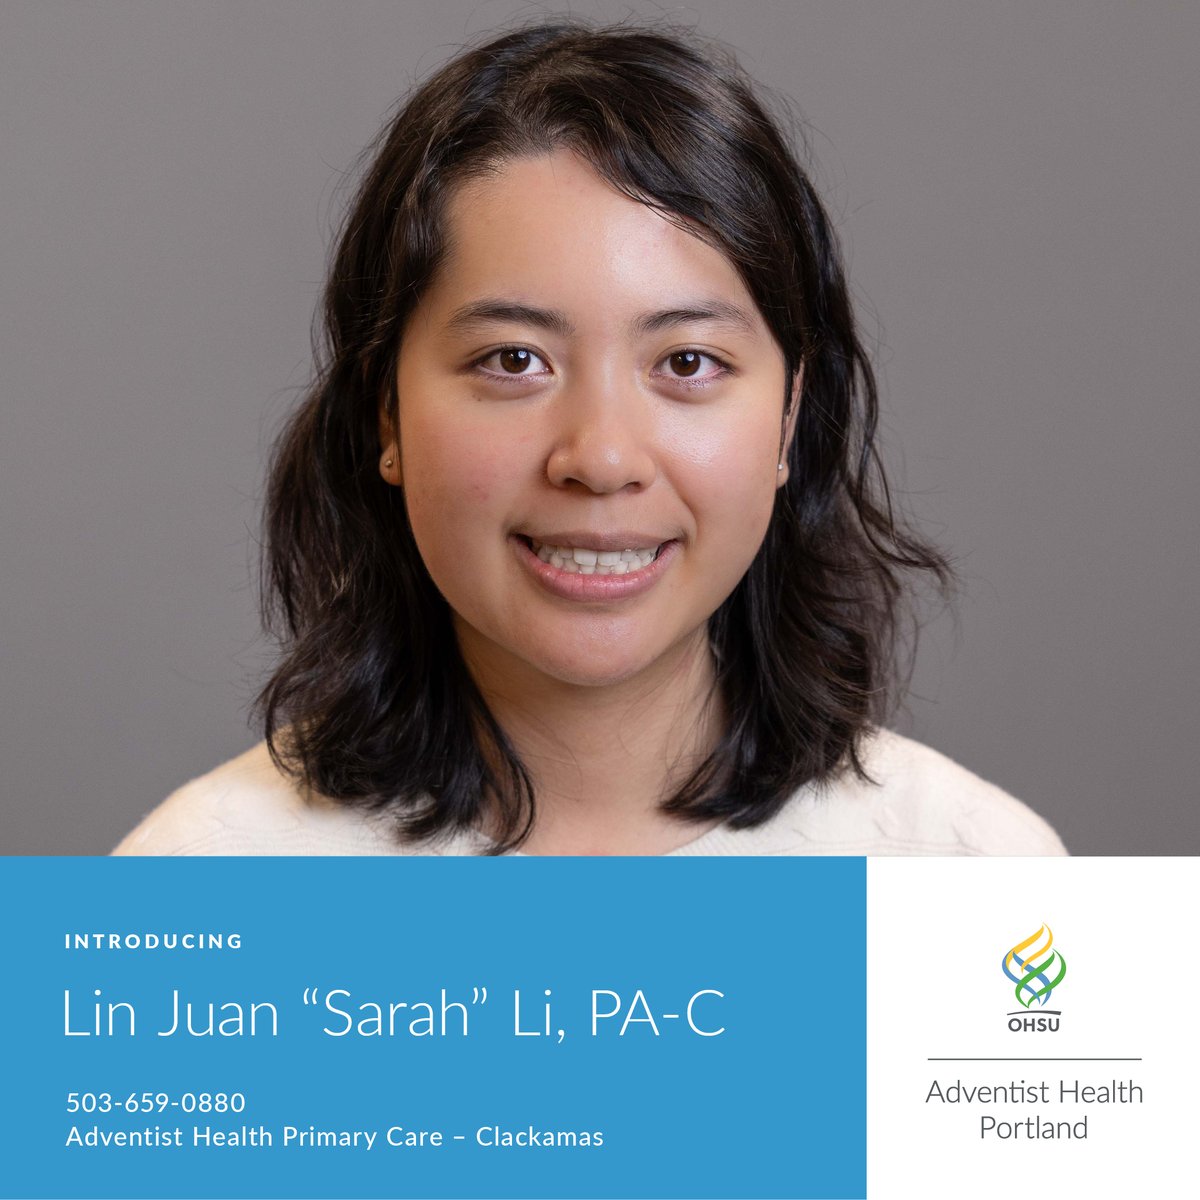 Lin Juan “Sarah” Li, PA-C, is a certified physician assistant specializing in family medicine. She enjoys building long-term relationships with patients of all ages and backgrounds. View Dr. Li's complete profile: spr.ly/6016Z58HG